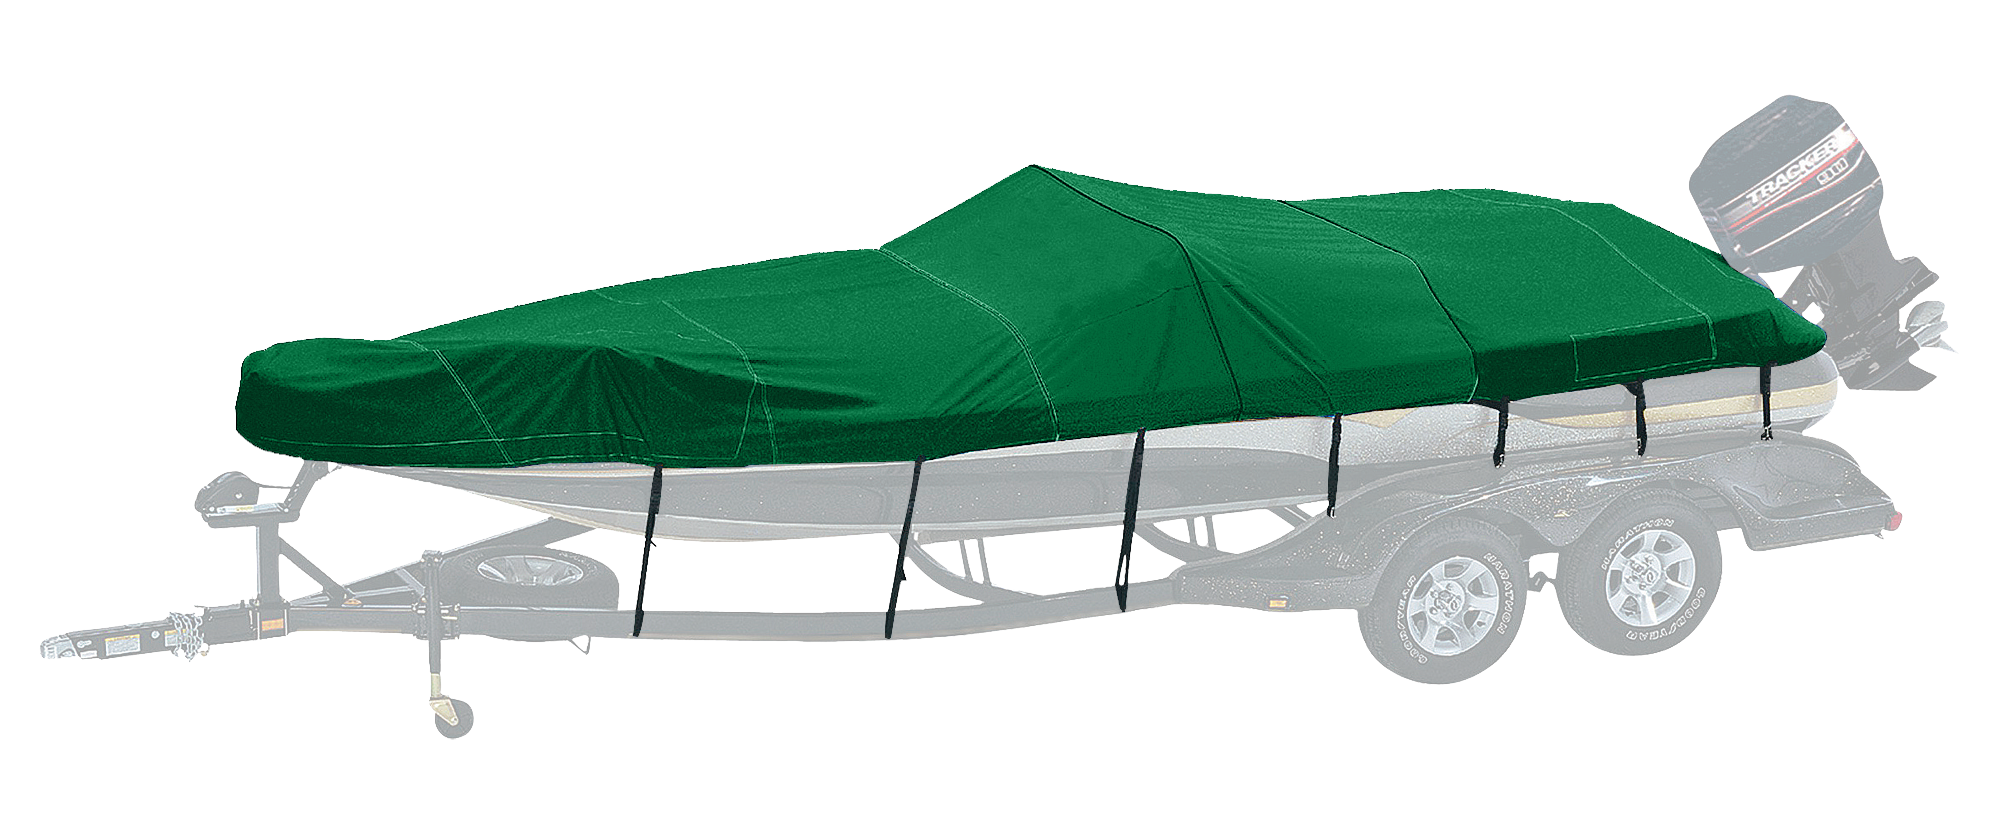 Bass Pro Shops Woodland Exact Fit Boat Cover - Tahoe Boats - 2005 215 Deckboat I/O - Forest Green